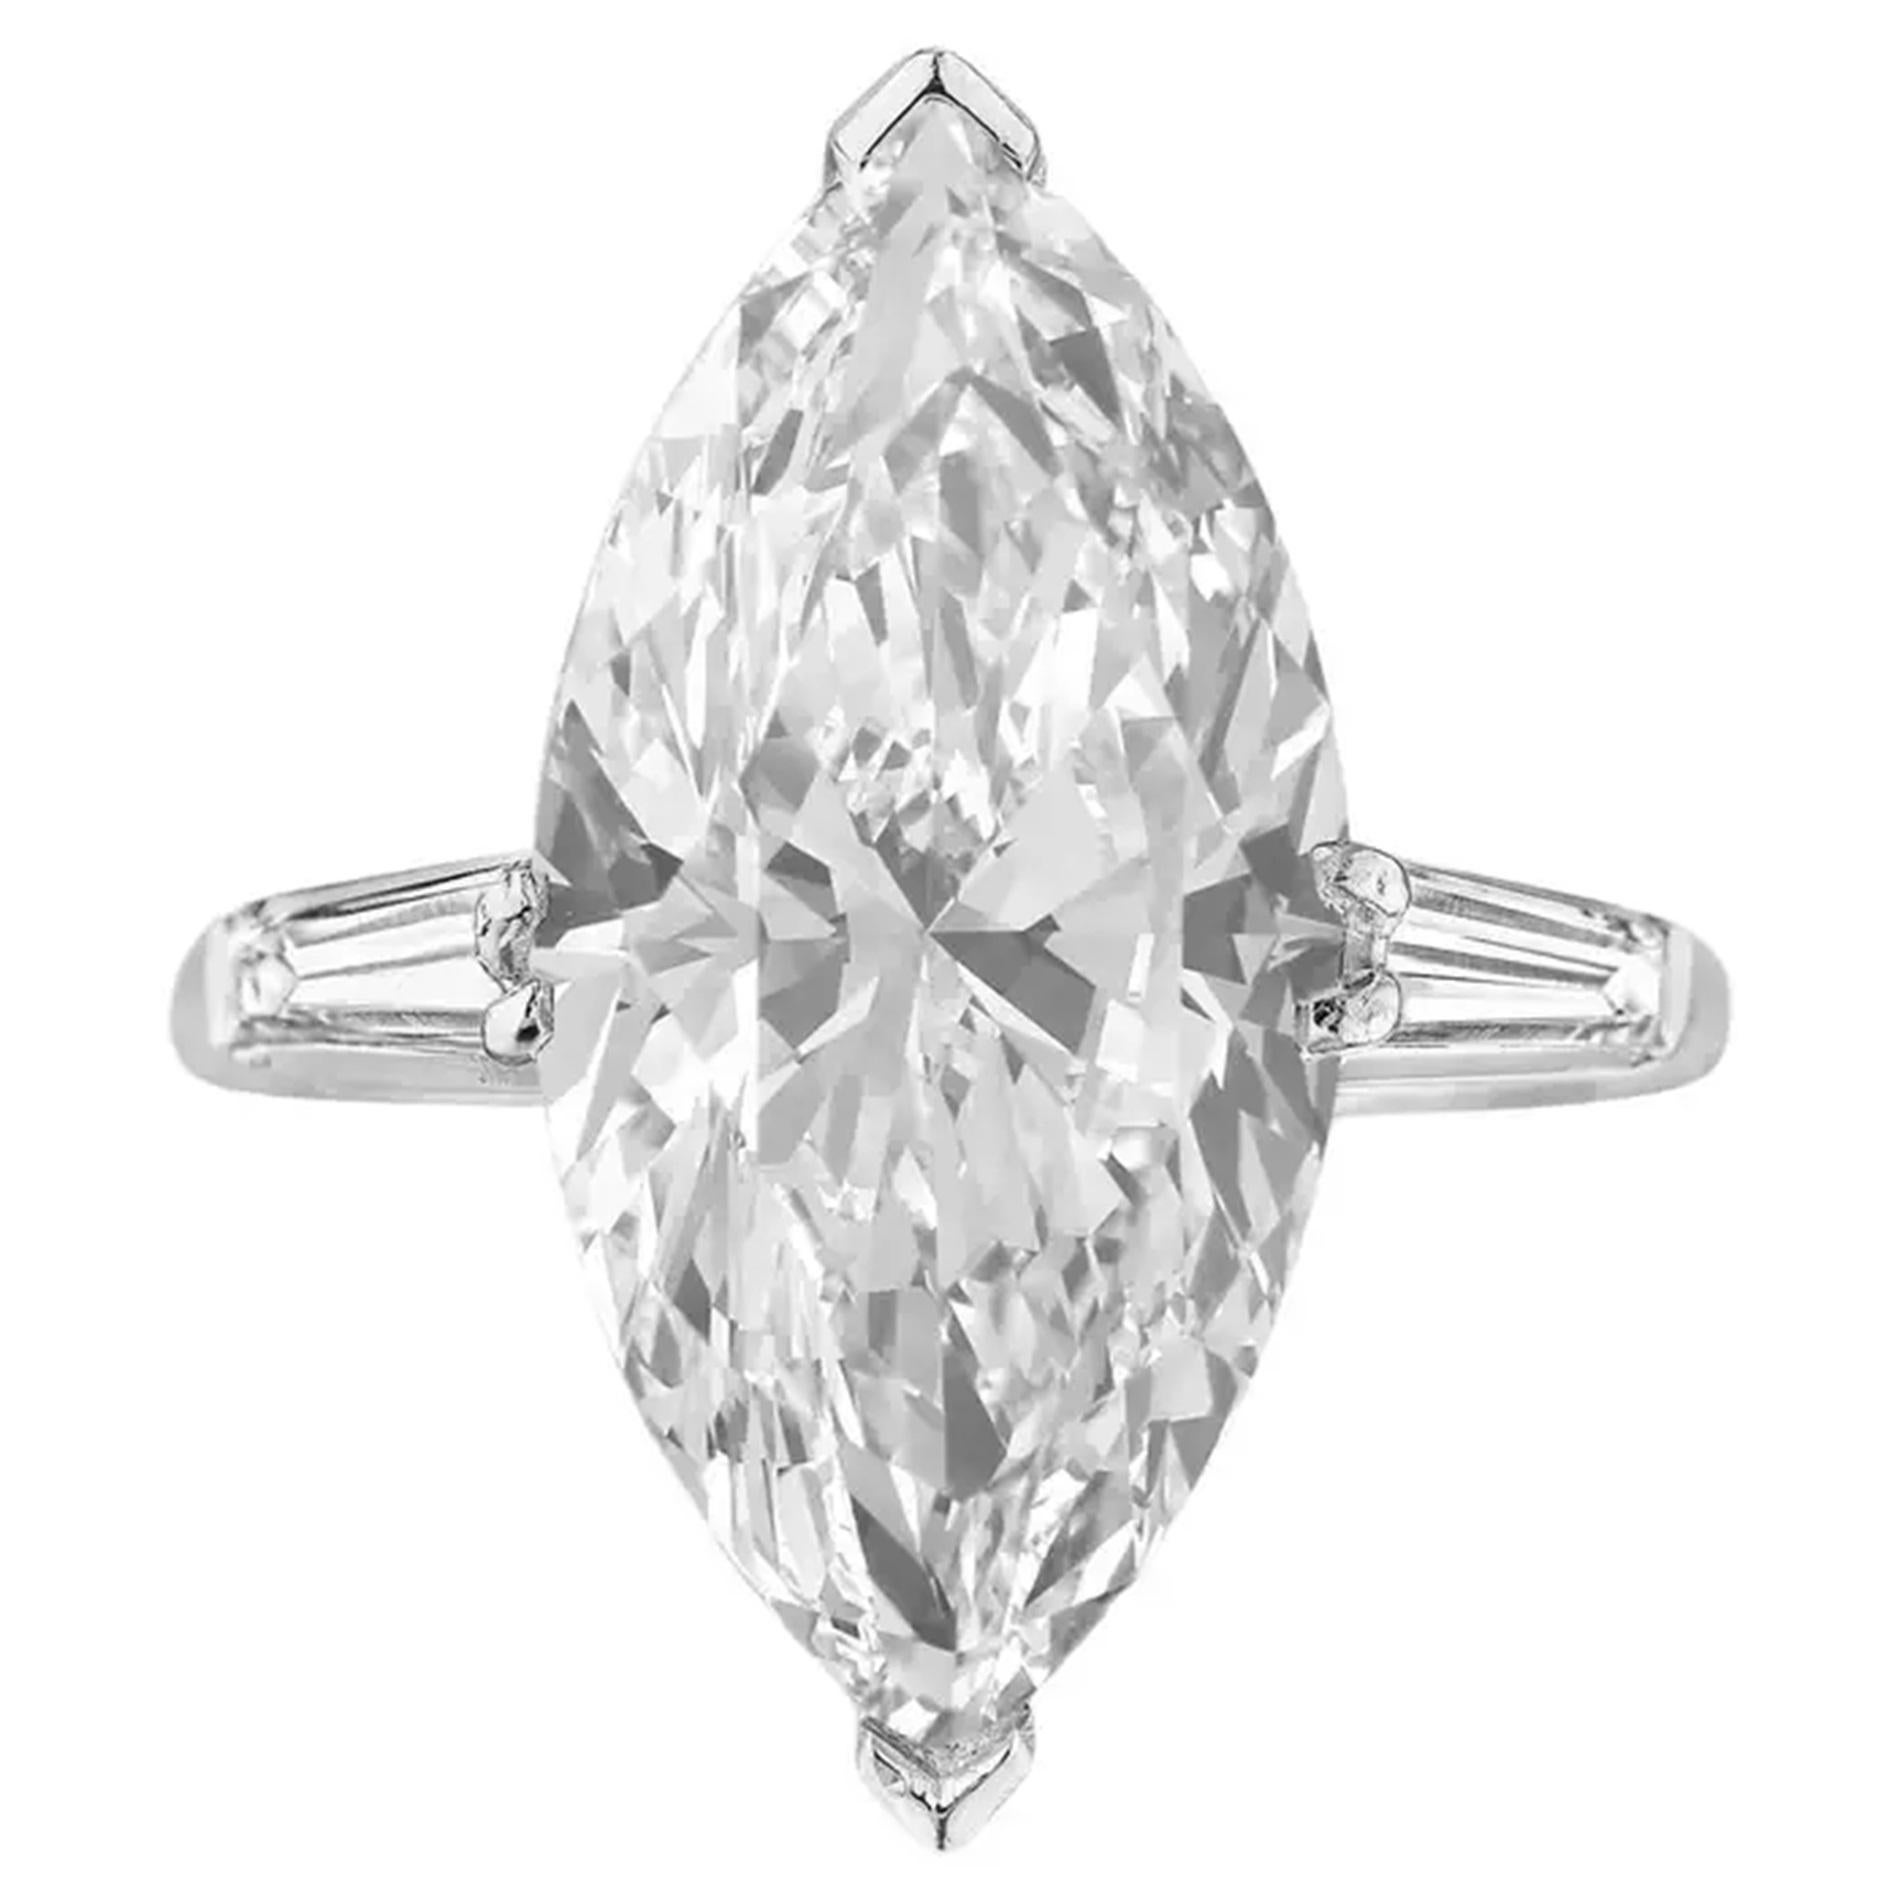 stunning 6-carat diamond, boasting a longer ratio that enhances its graceful appearance. This remarkable gem is adorned with excellent polish and symmetry, ensuring unparalleled brilliance and sparkle. With none fluorescence, its natural beauty